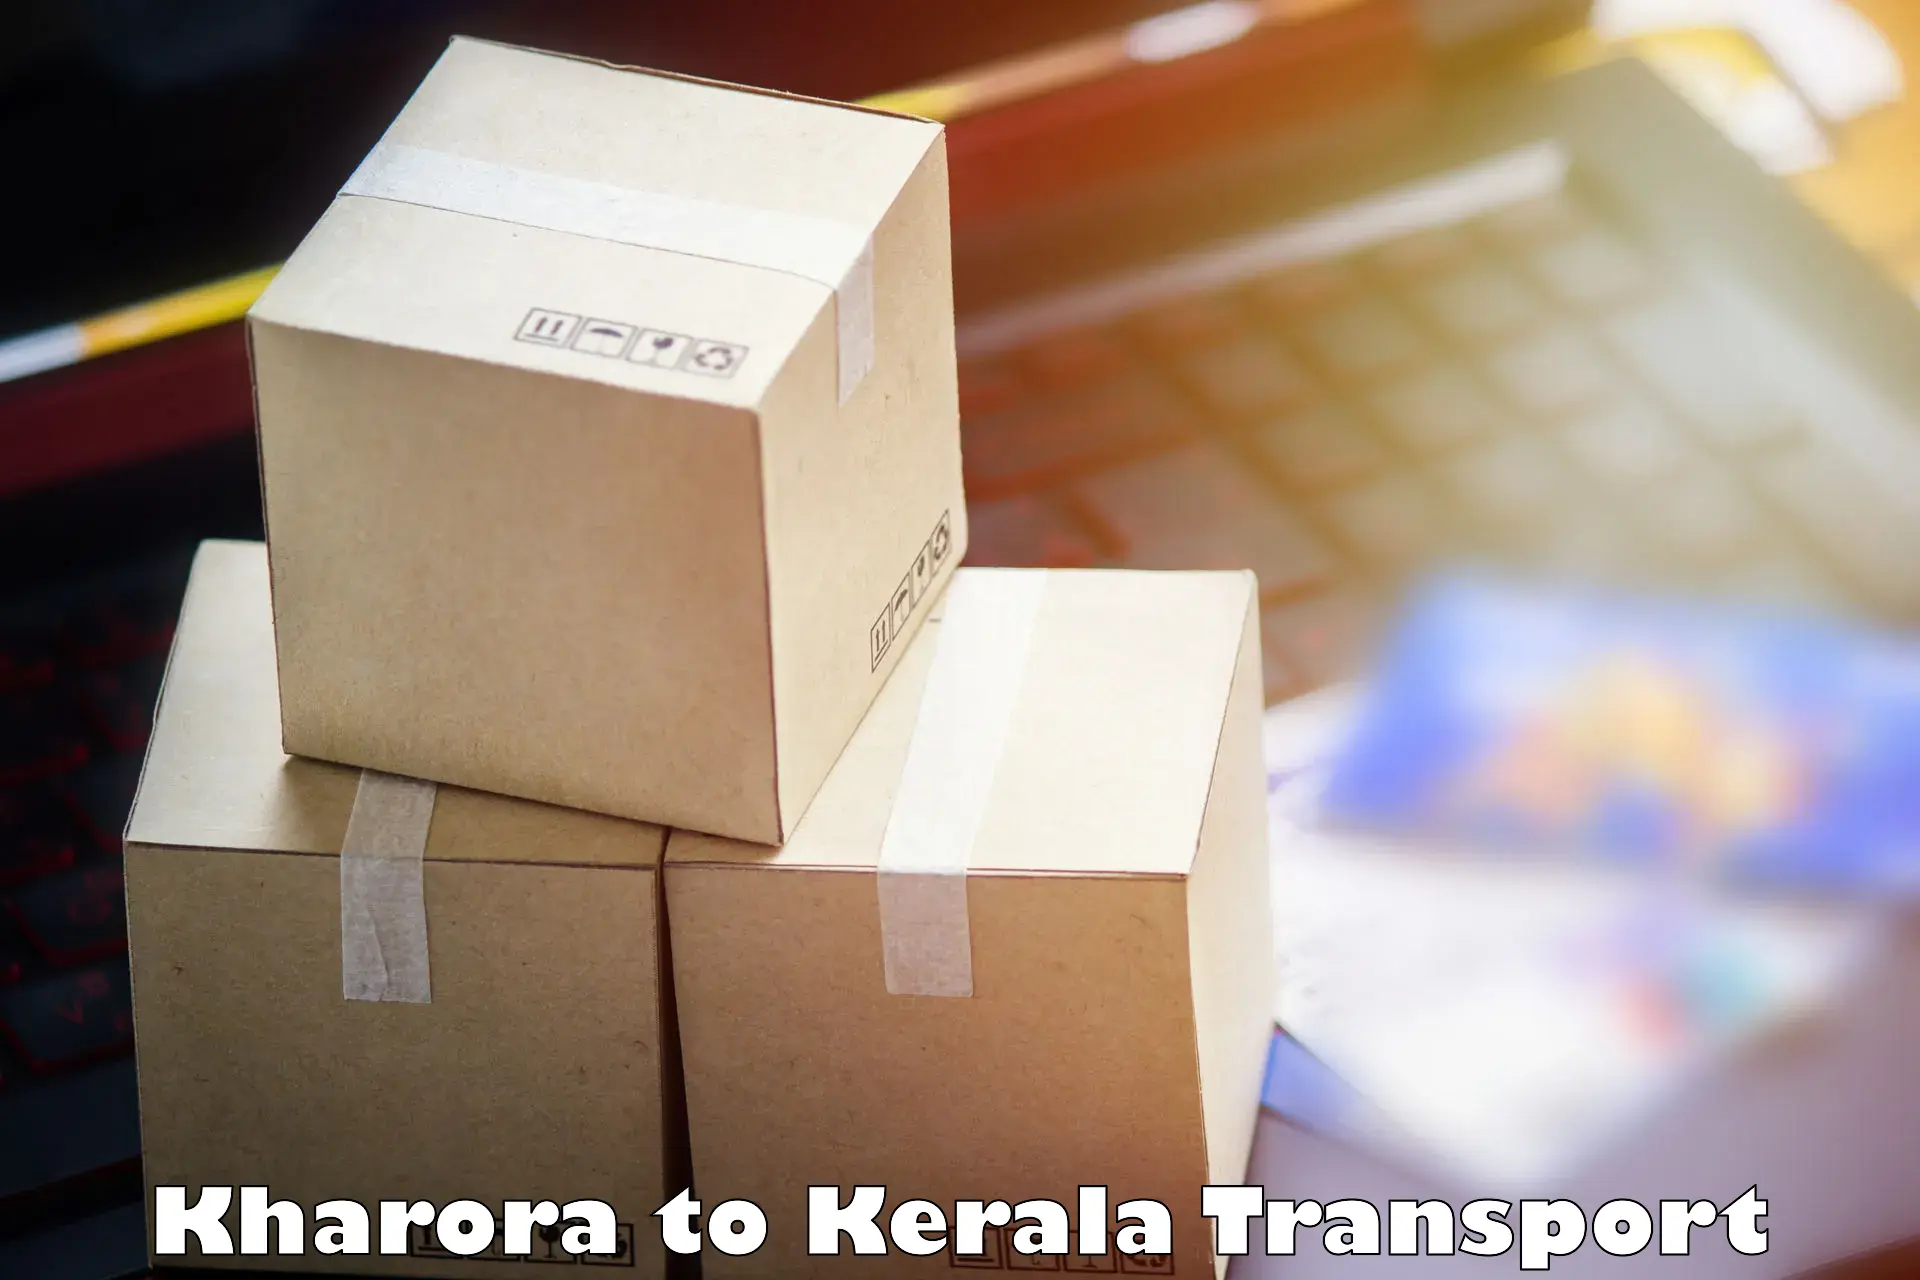 Cargo transportation services Kharora to Cochin University of Science and Technology